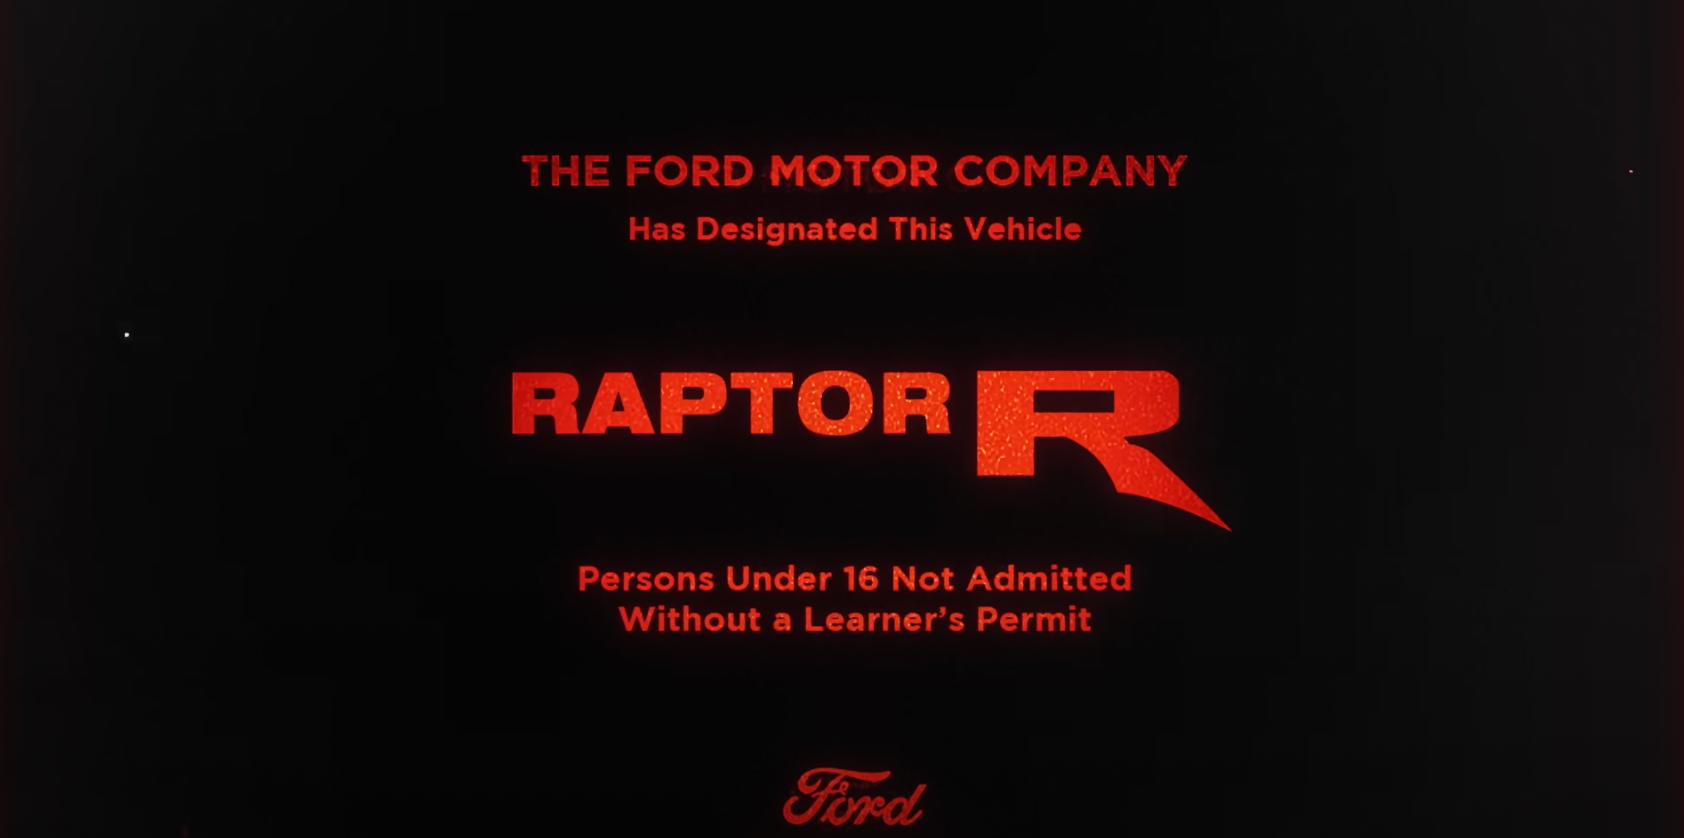 image from Ford ad